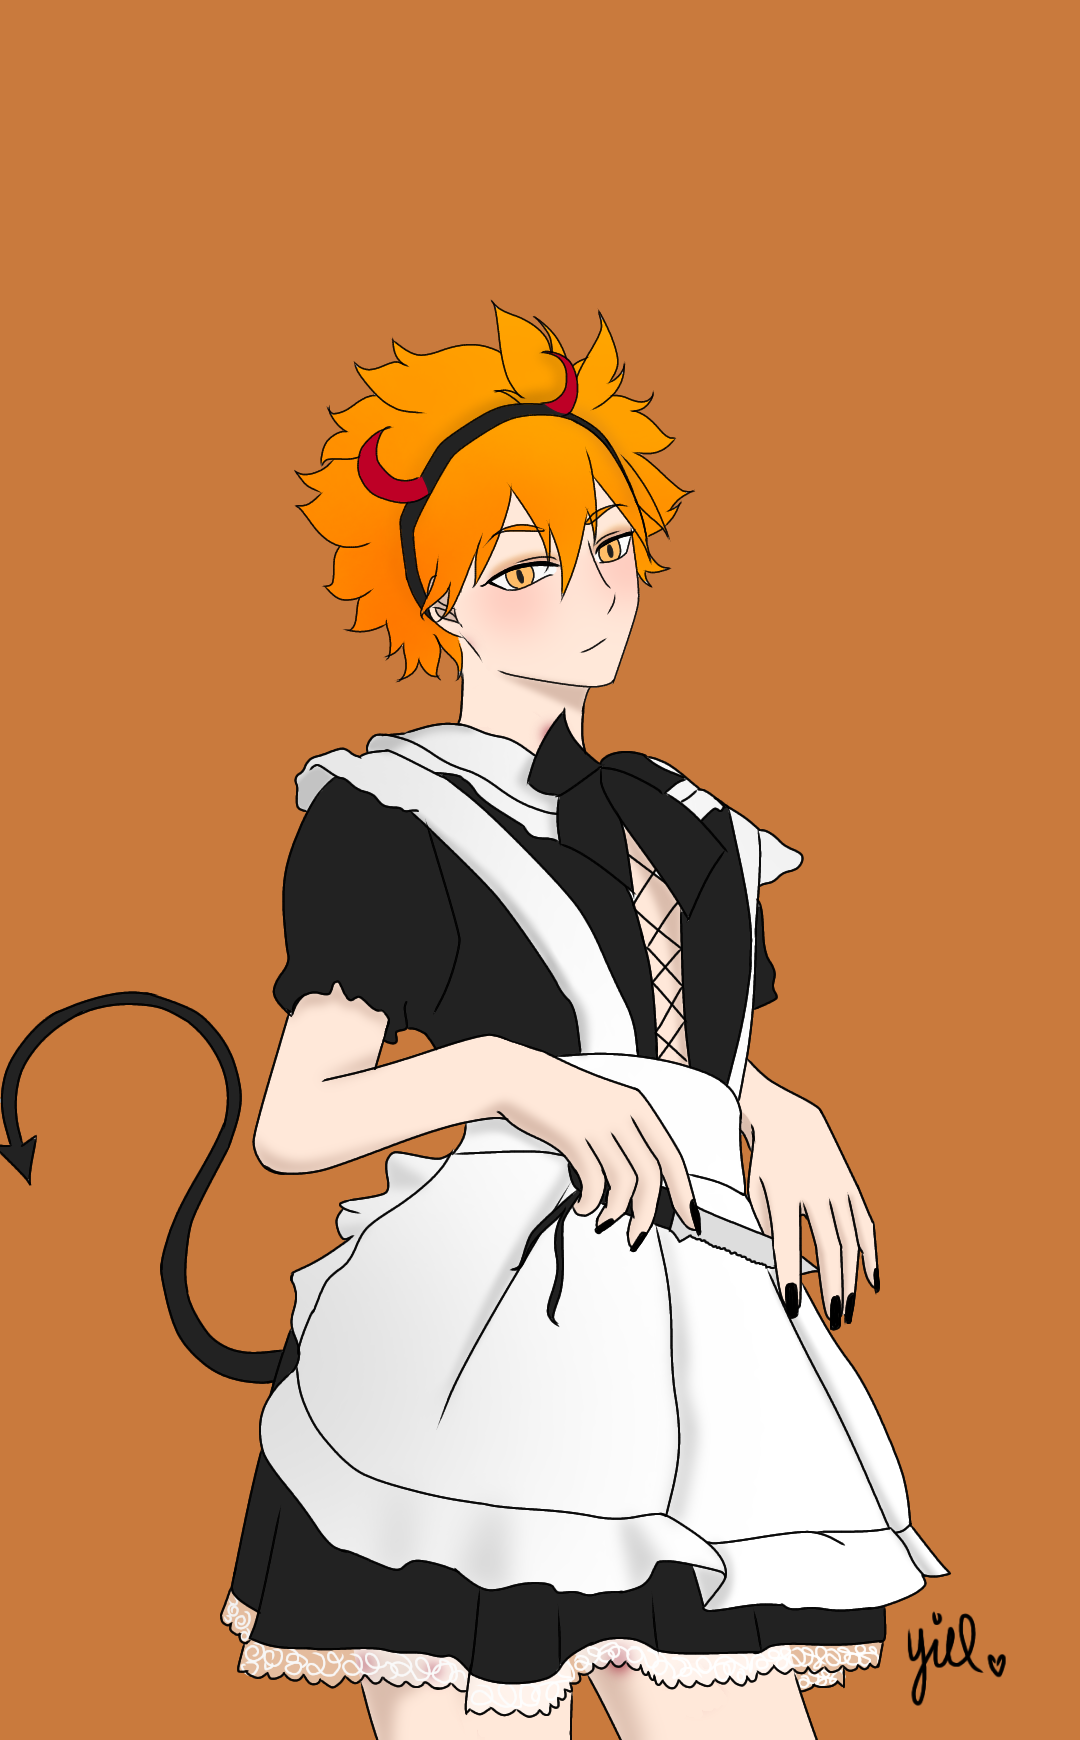 Hinata in Maid Outfit by Yielicious on DeviantArt